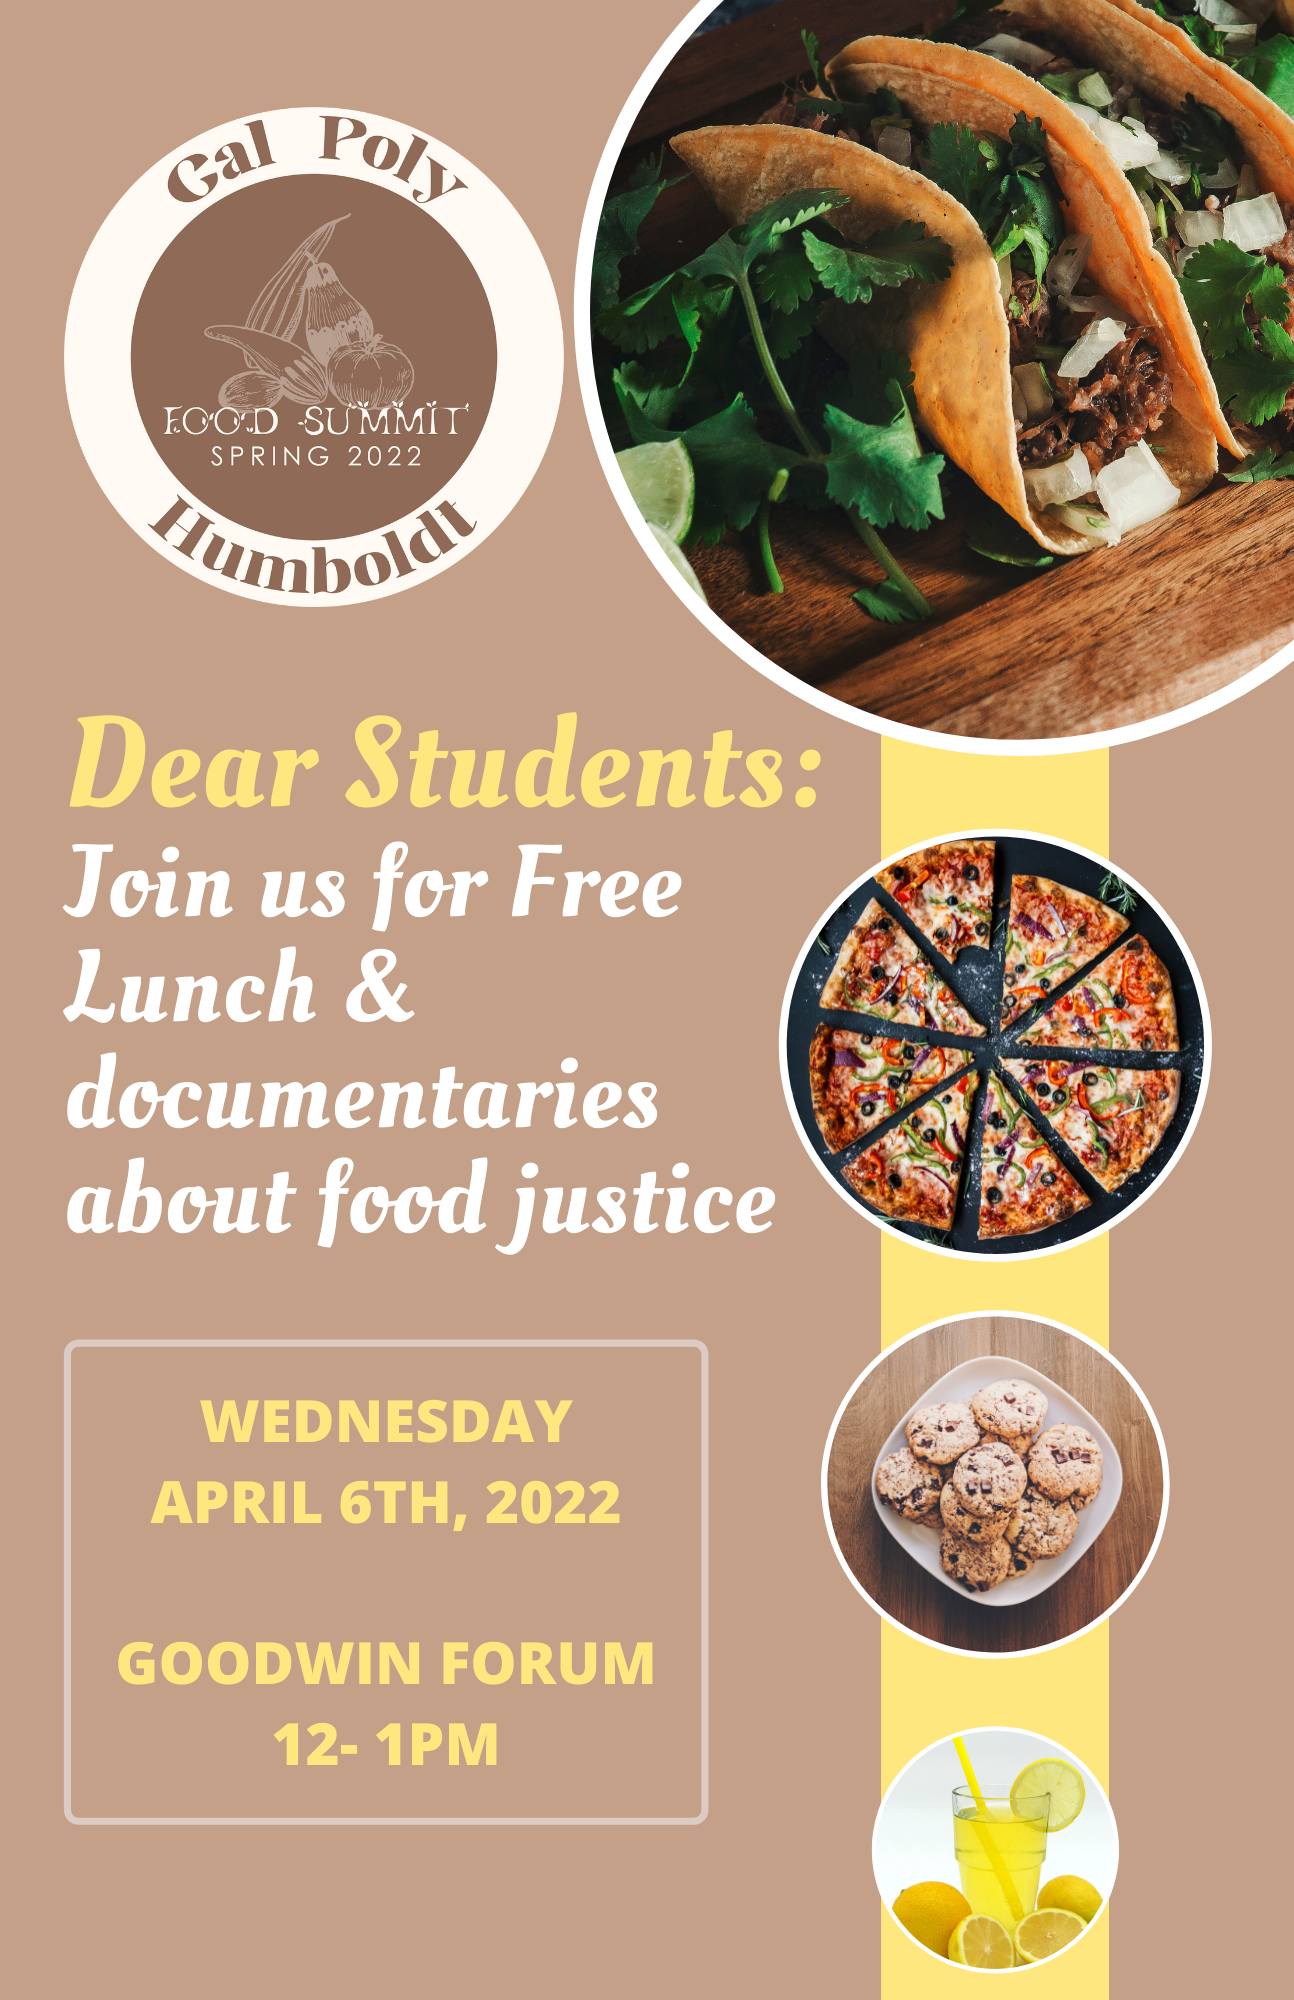 Free lunch and food justice documentaries April 6th, noon-1pm Goodwin Forum